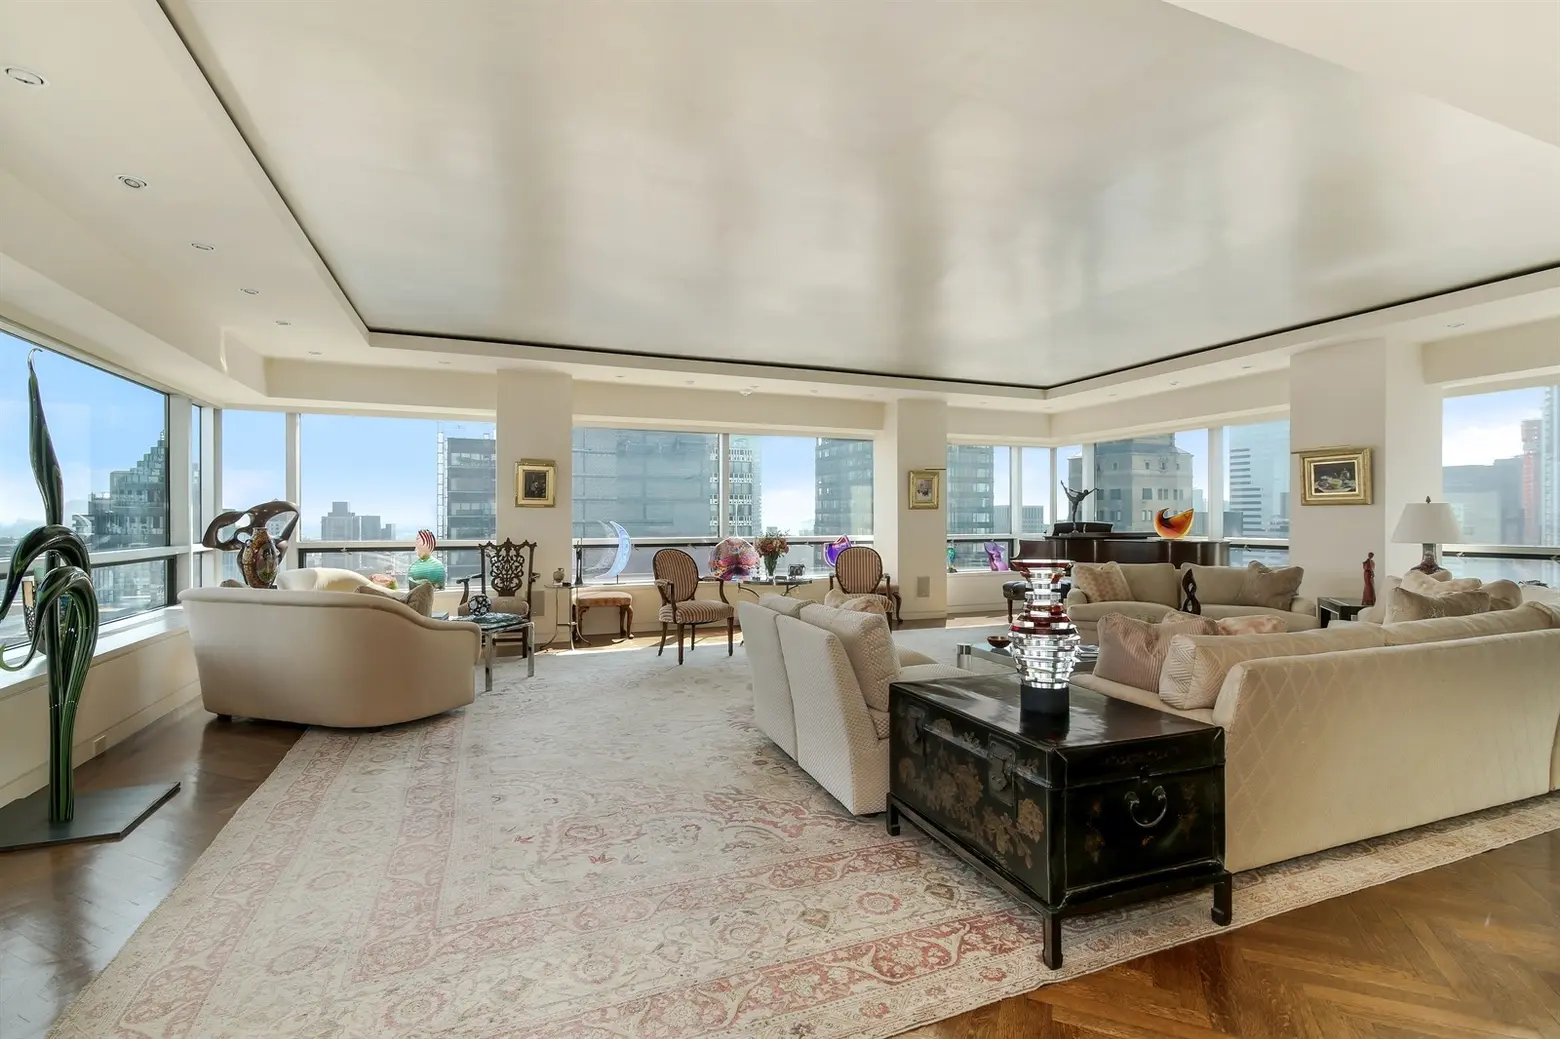 World Trade Center developer Larry Silverstein sells Upper East Side apartment at a loss